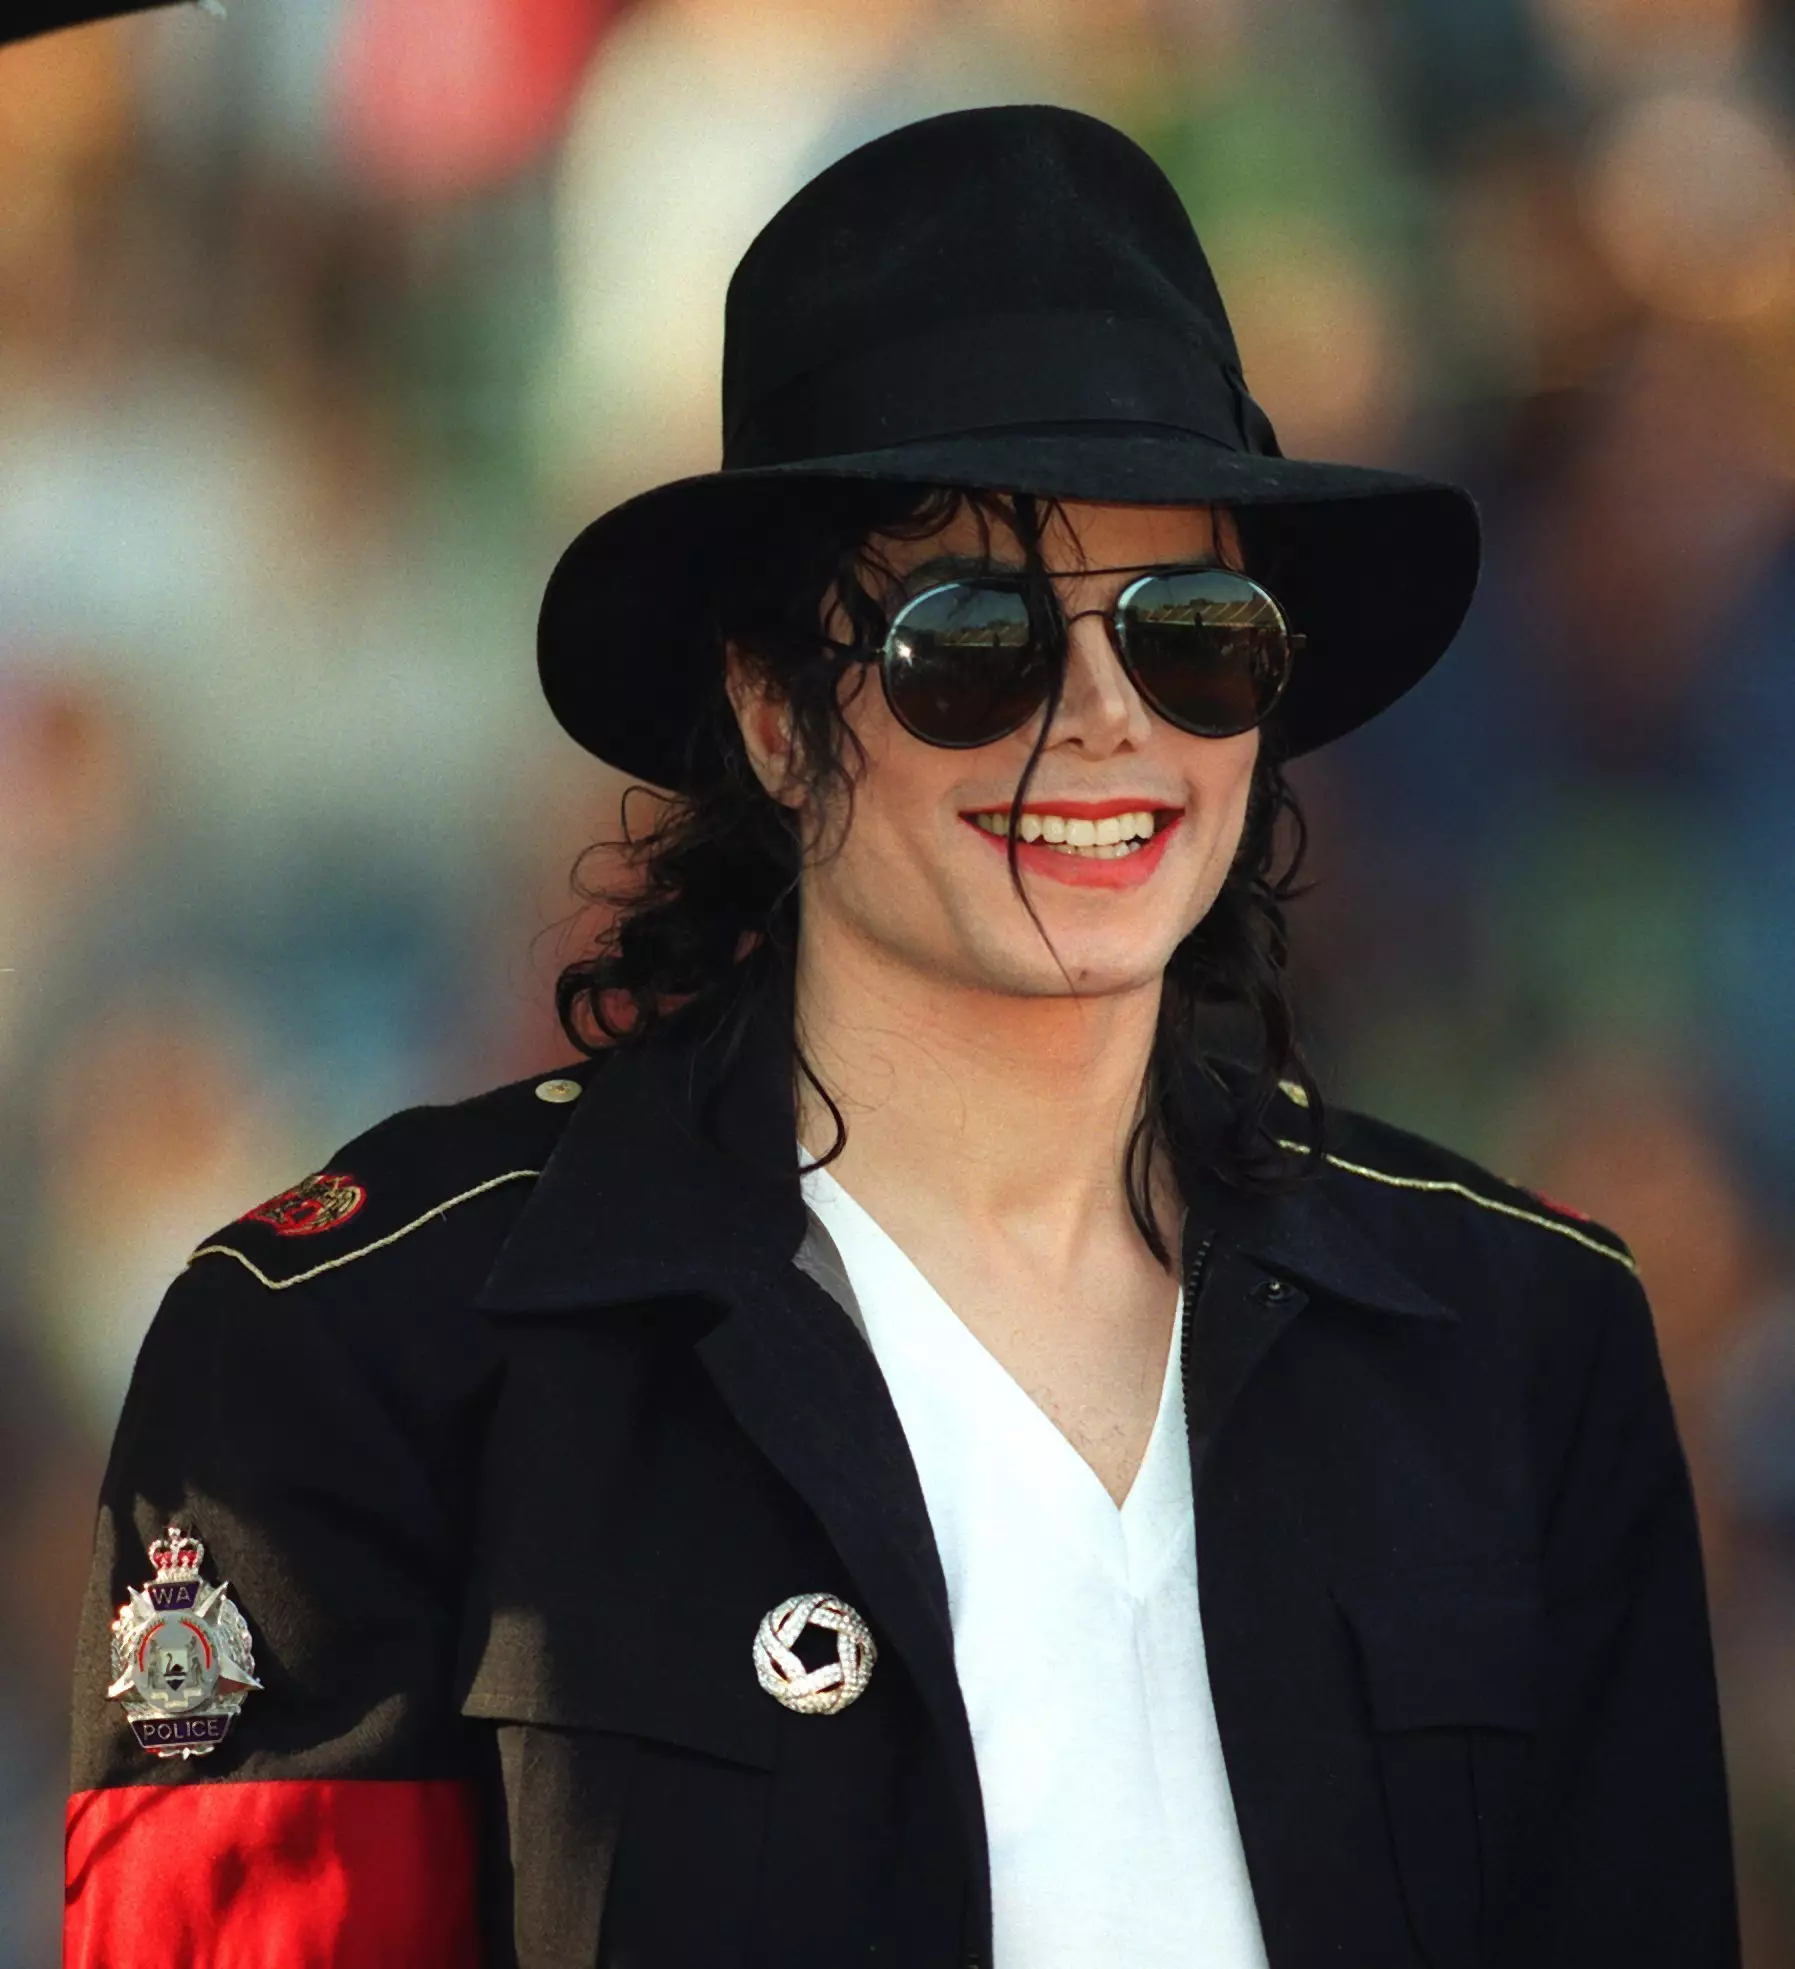 Michael Jackson's life was marred by controversy over alleged incidents of sexual abuse.